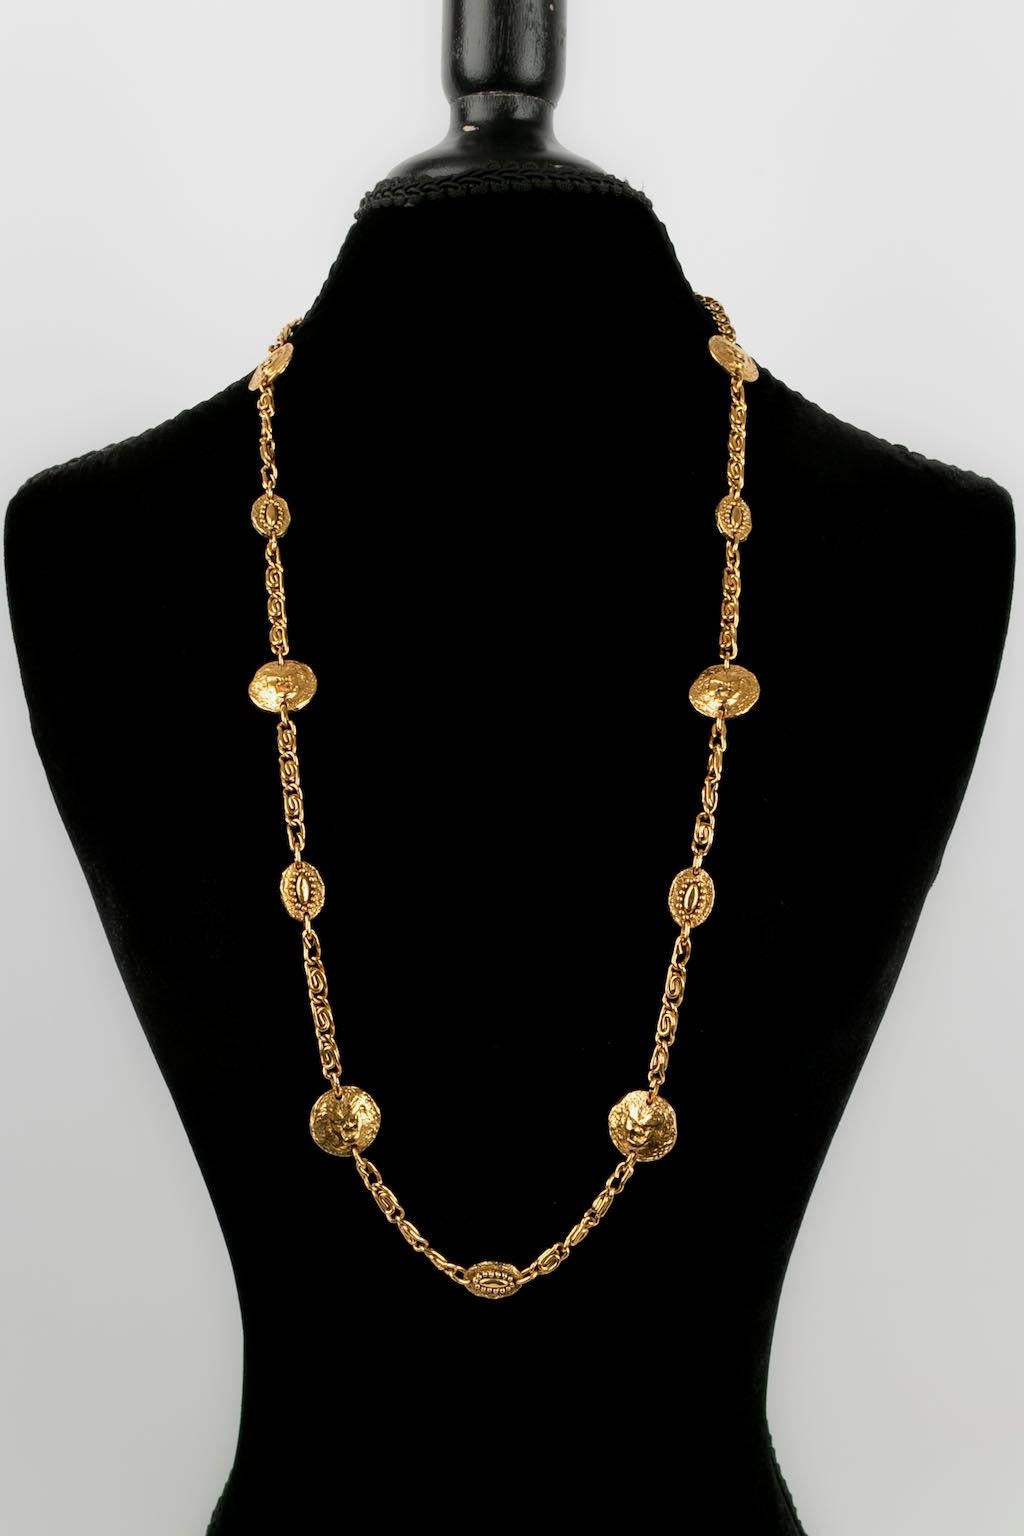 Chanel -(Made in France) Gilded metal necklace dating from the early 1980s.

Additional information: 
Dimensions: Length: 91 cm
Condition: Very good condition
Seller Ref number: CB40